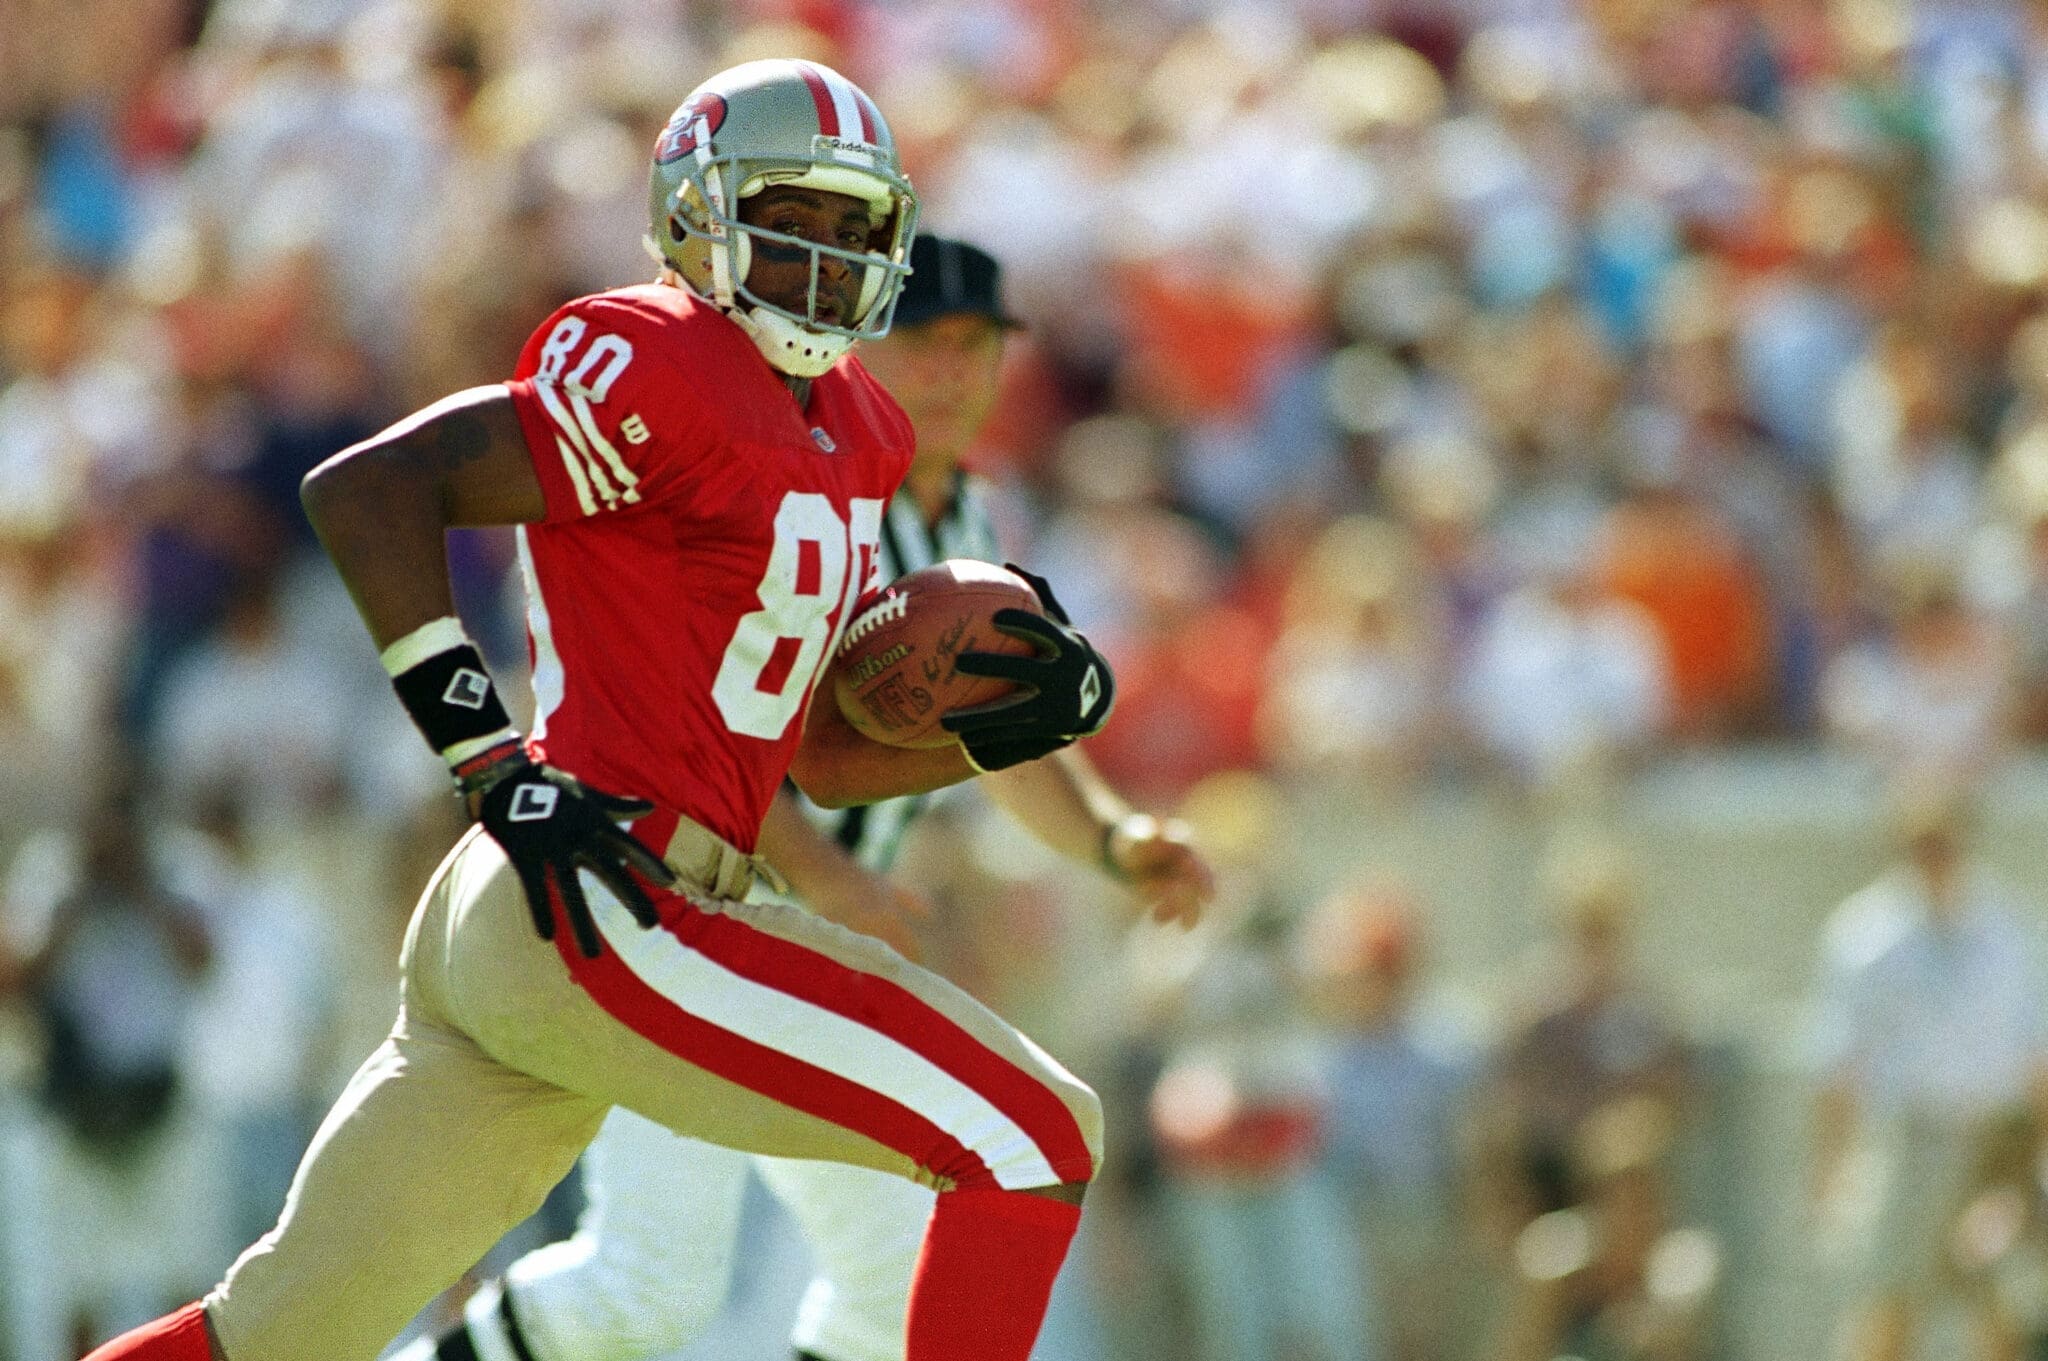 San Francisco 49ers WR Jerry Rice